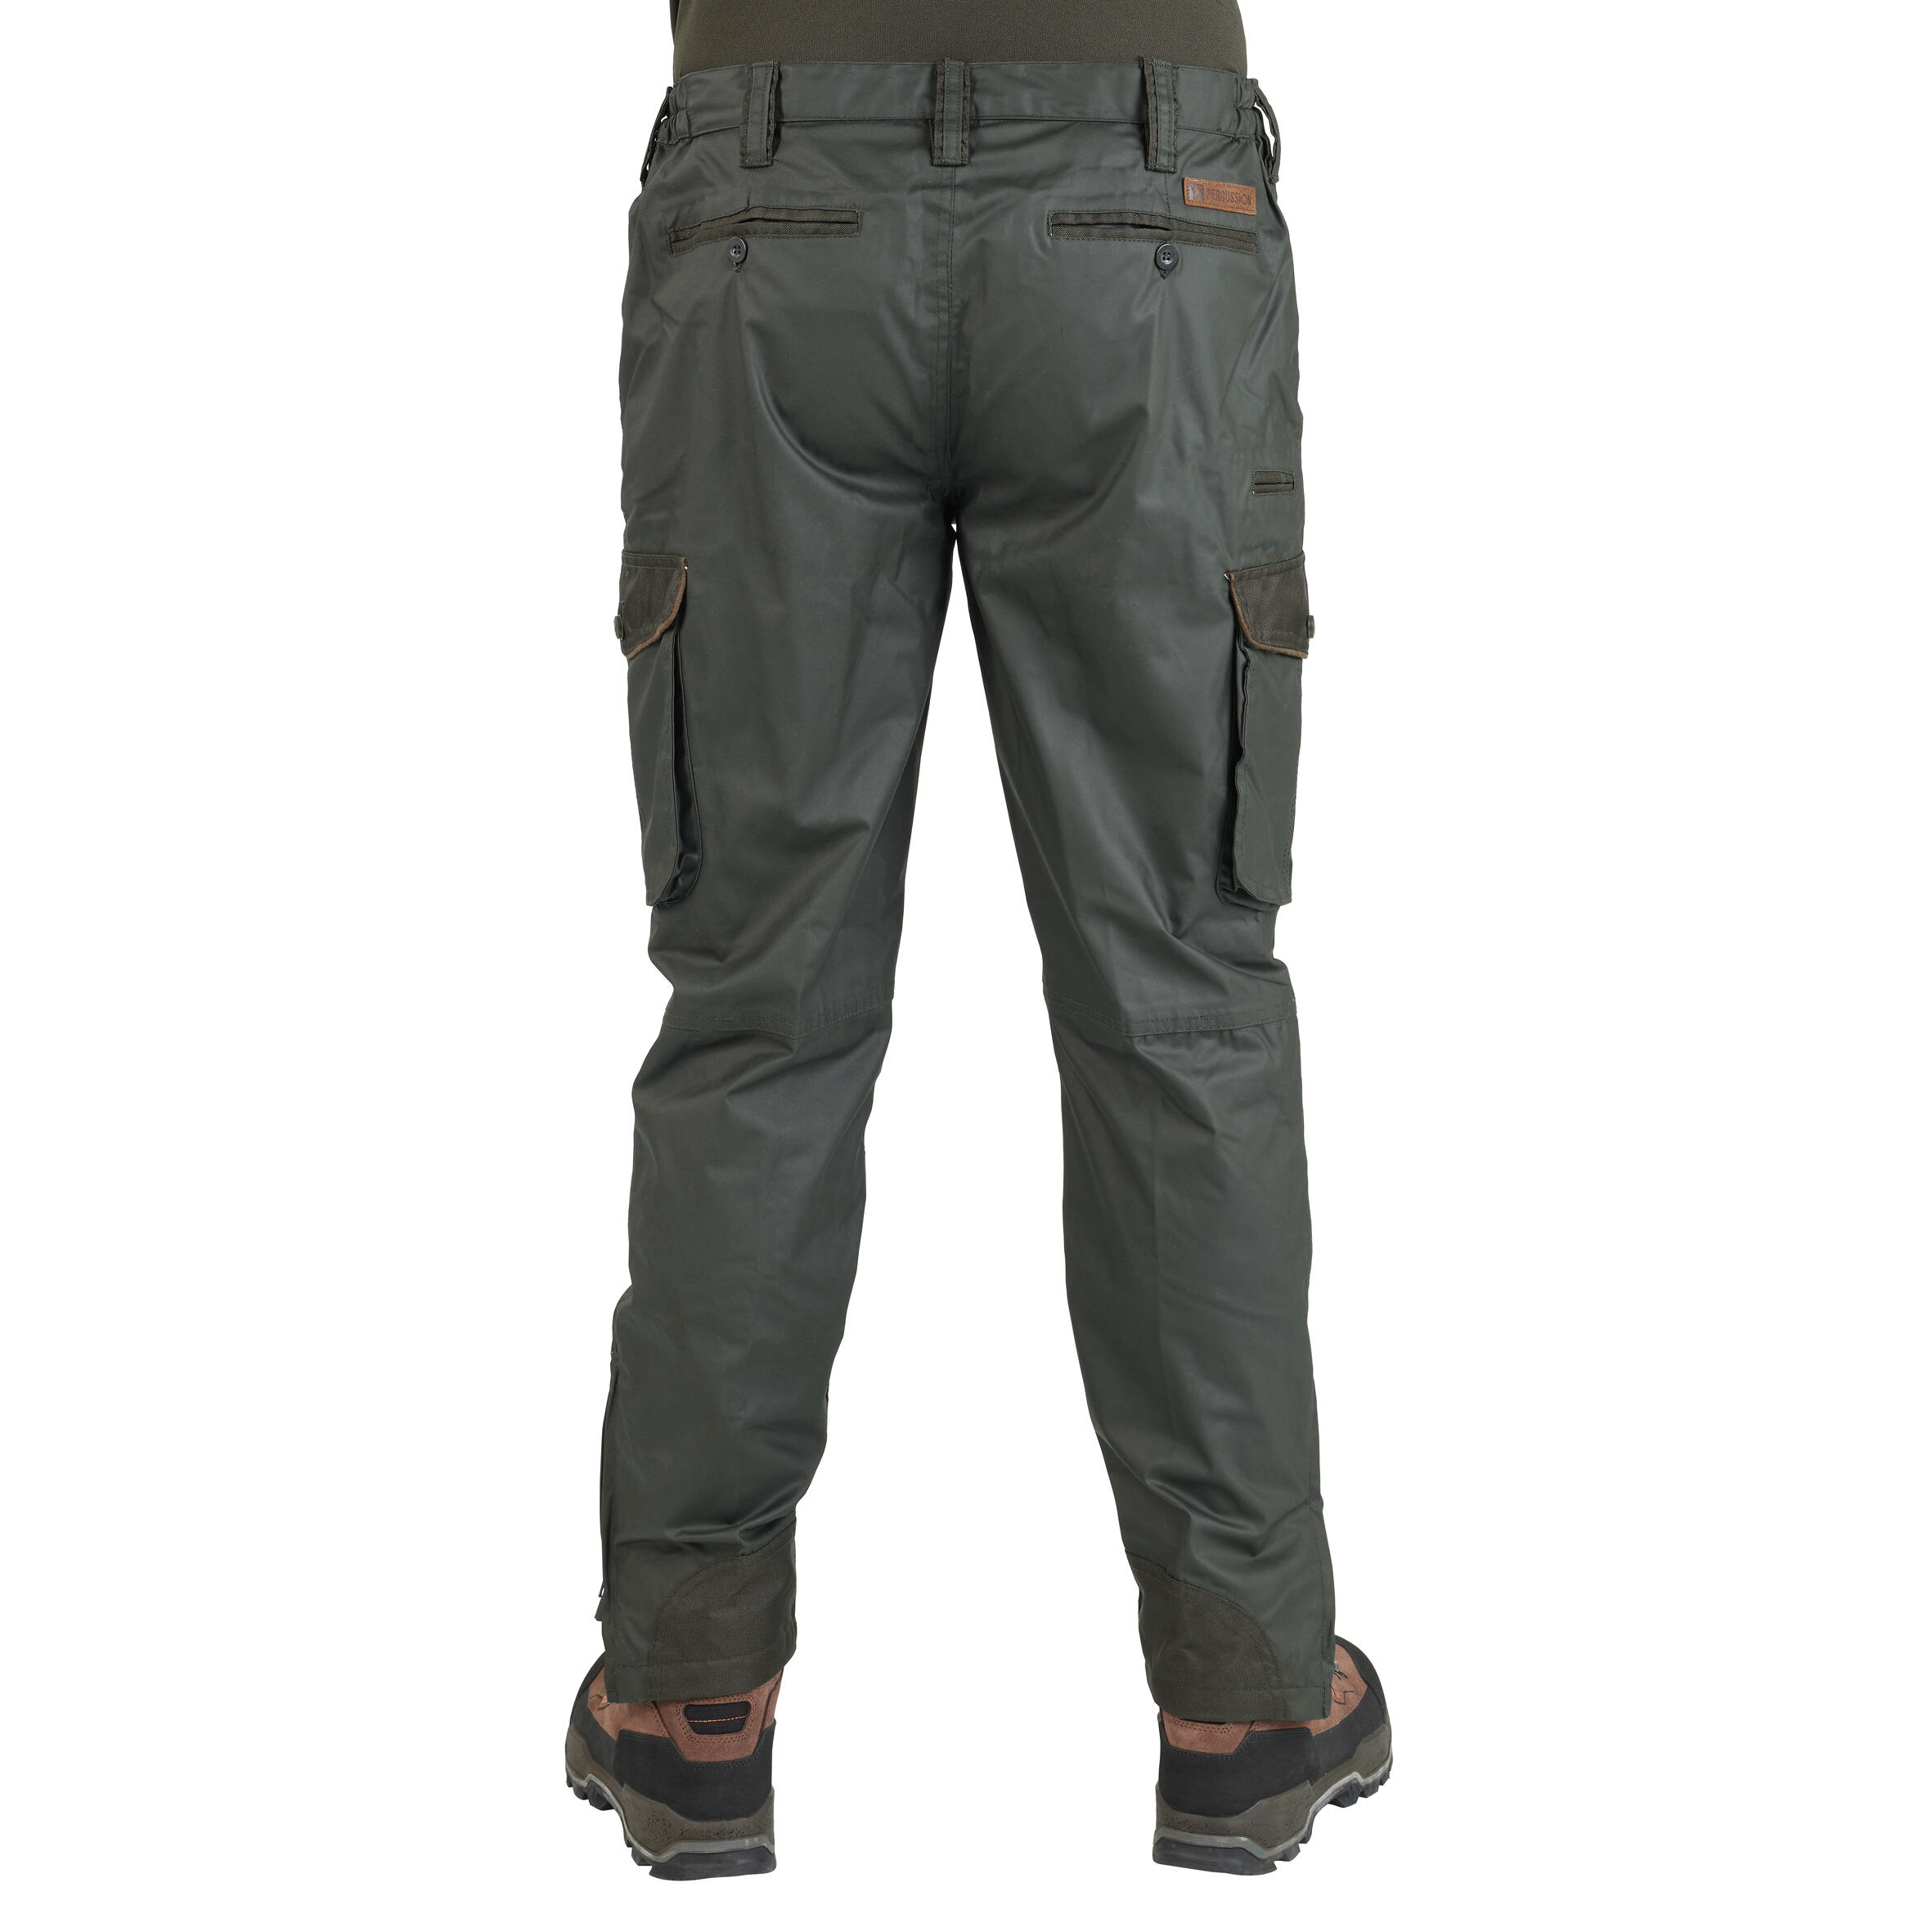 Impertane Tapered Country Sport Trousers - Green 7/14